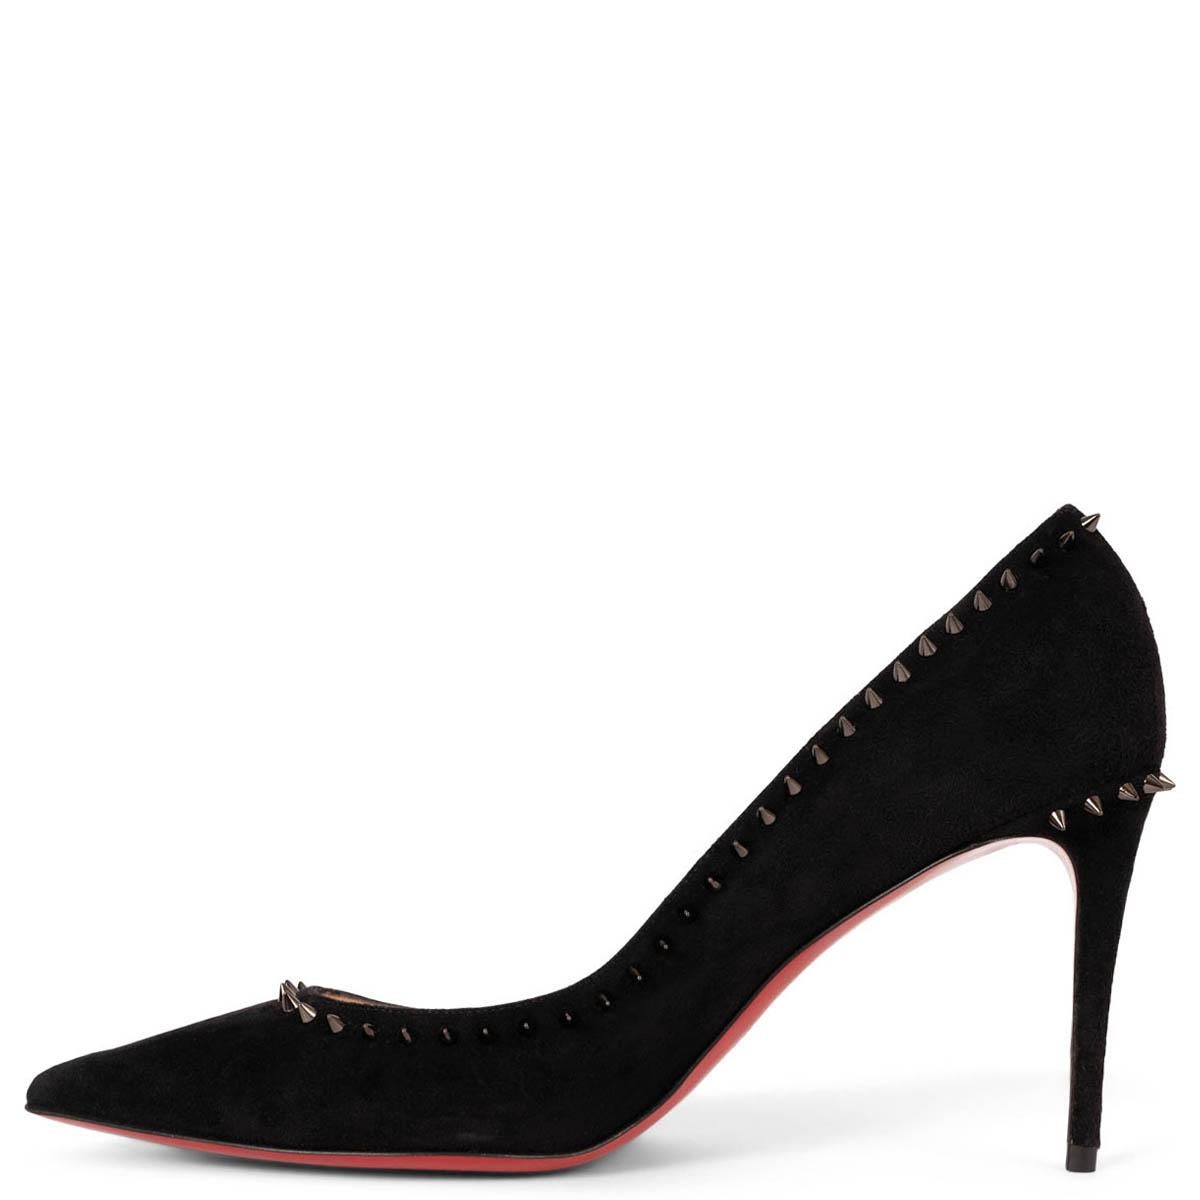 Women's CHRISTIAN LOUBOUTIN black suede ANJALINA 85 Pumps Shoes 39.5 For Sale